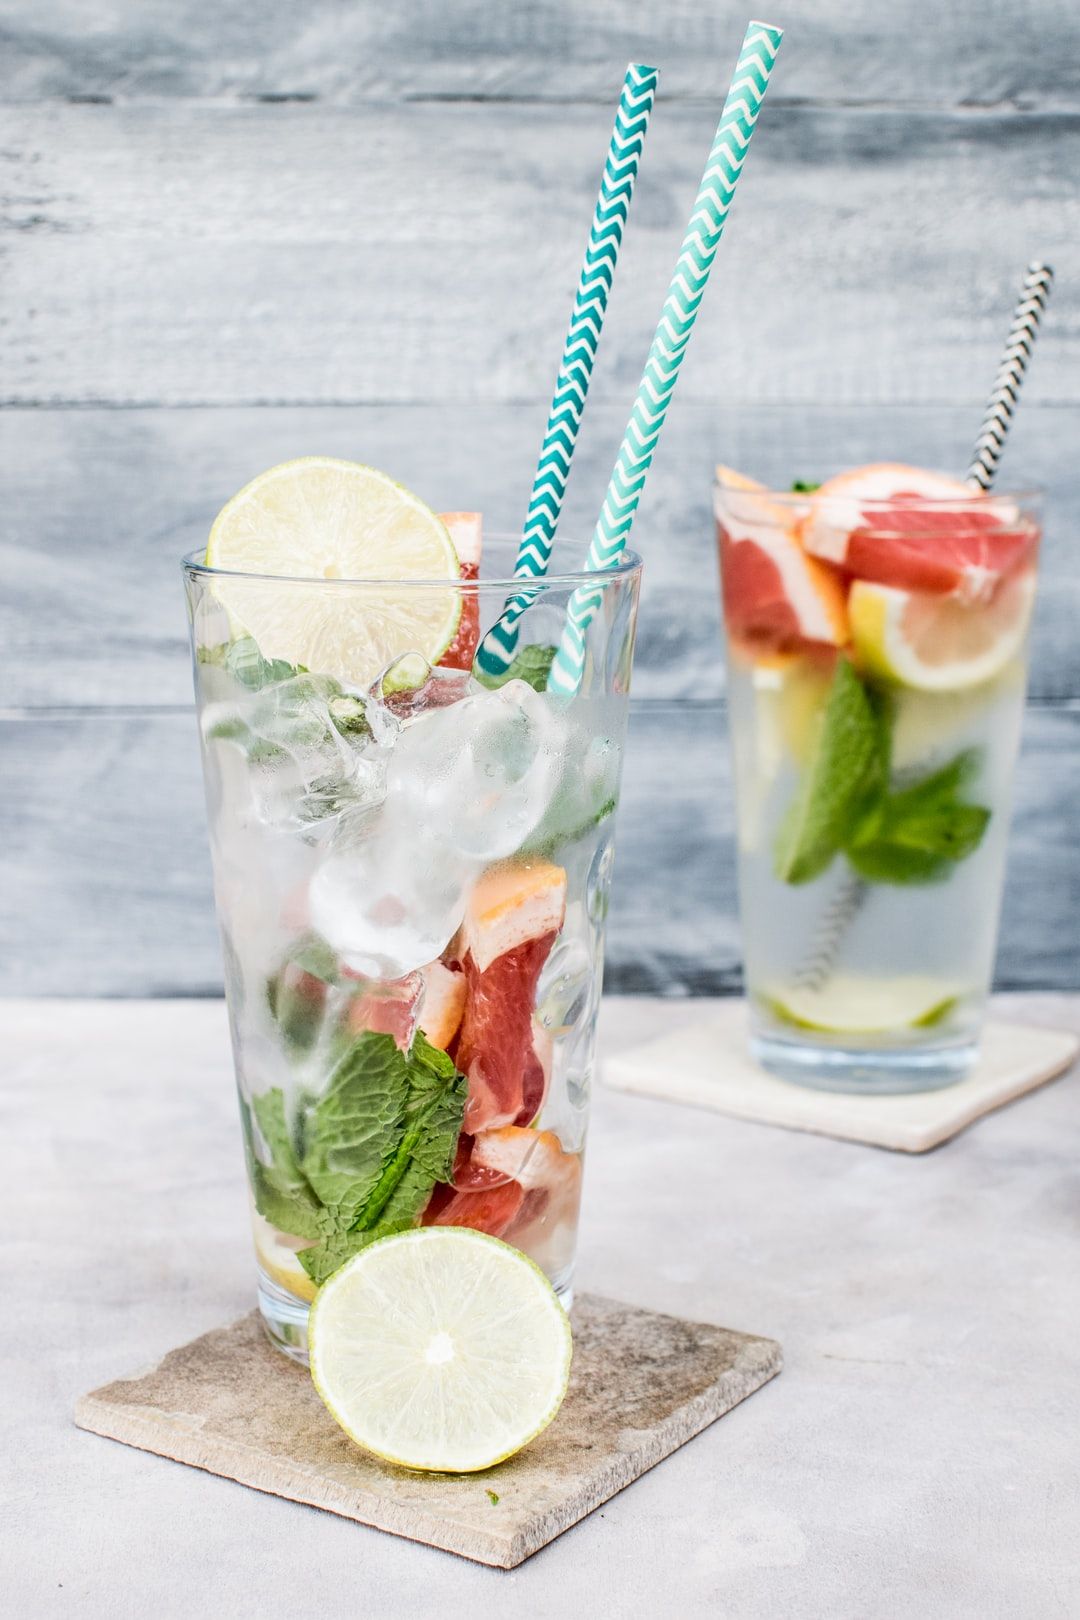 Summer Drink Picture. Download Free Image